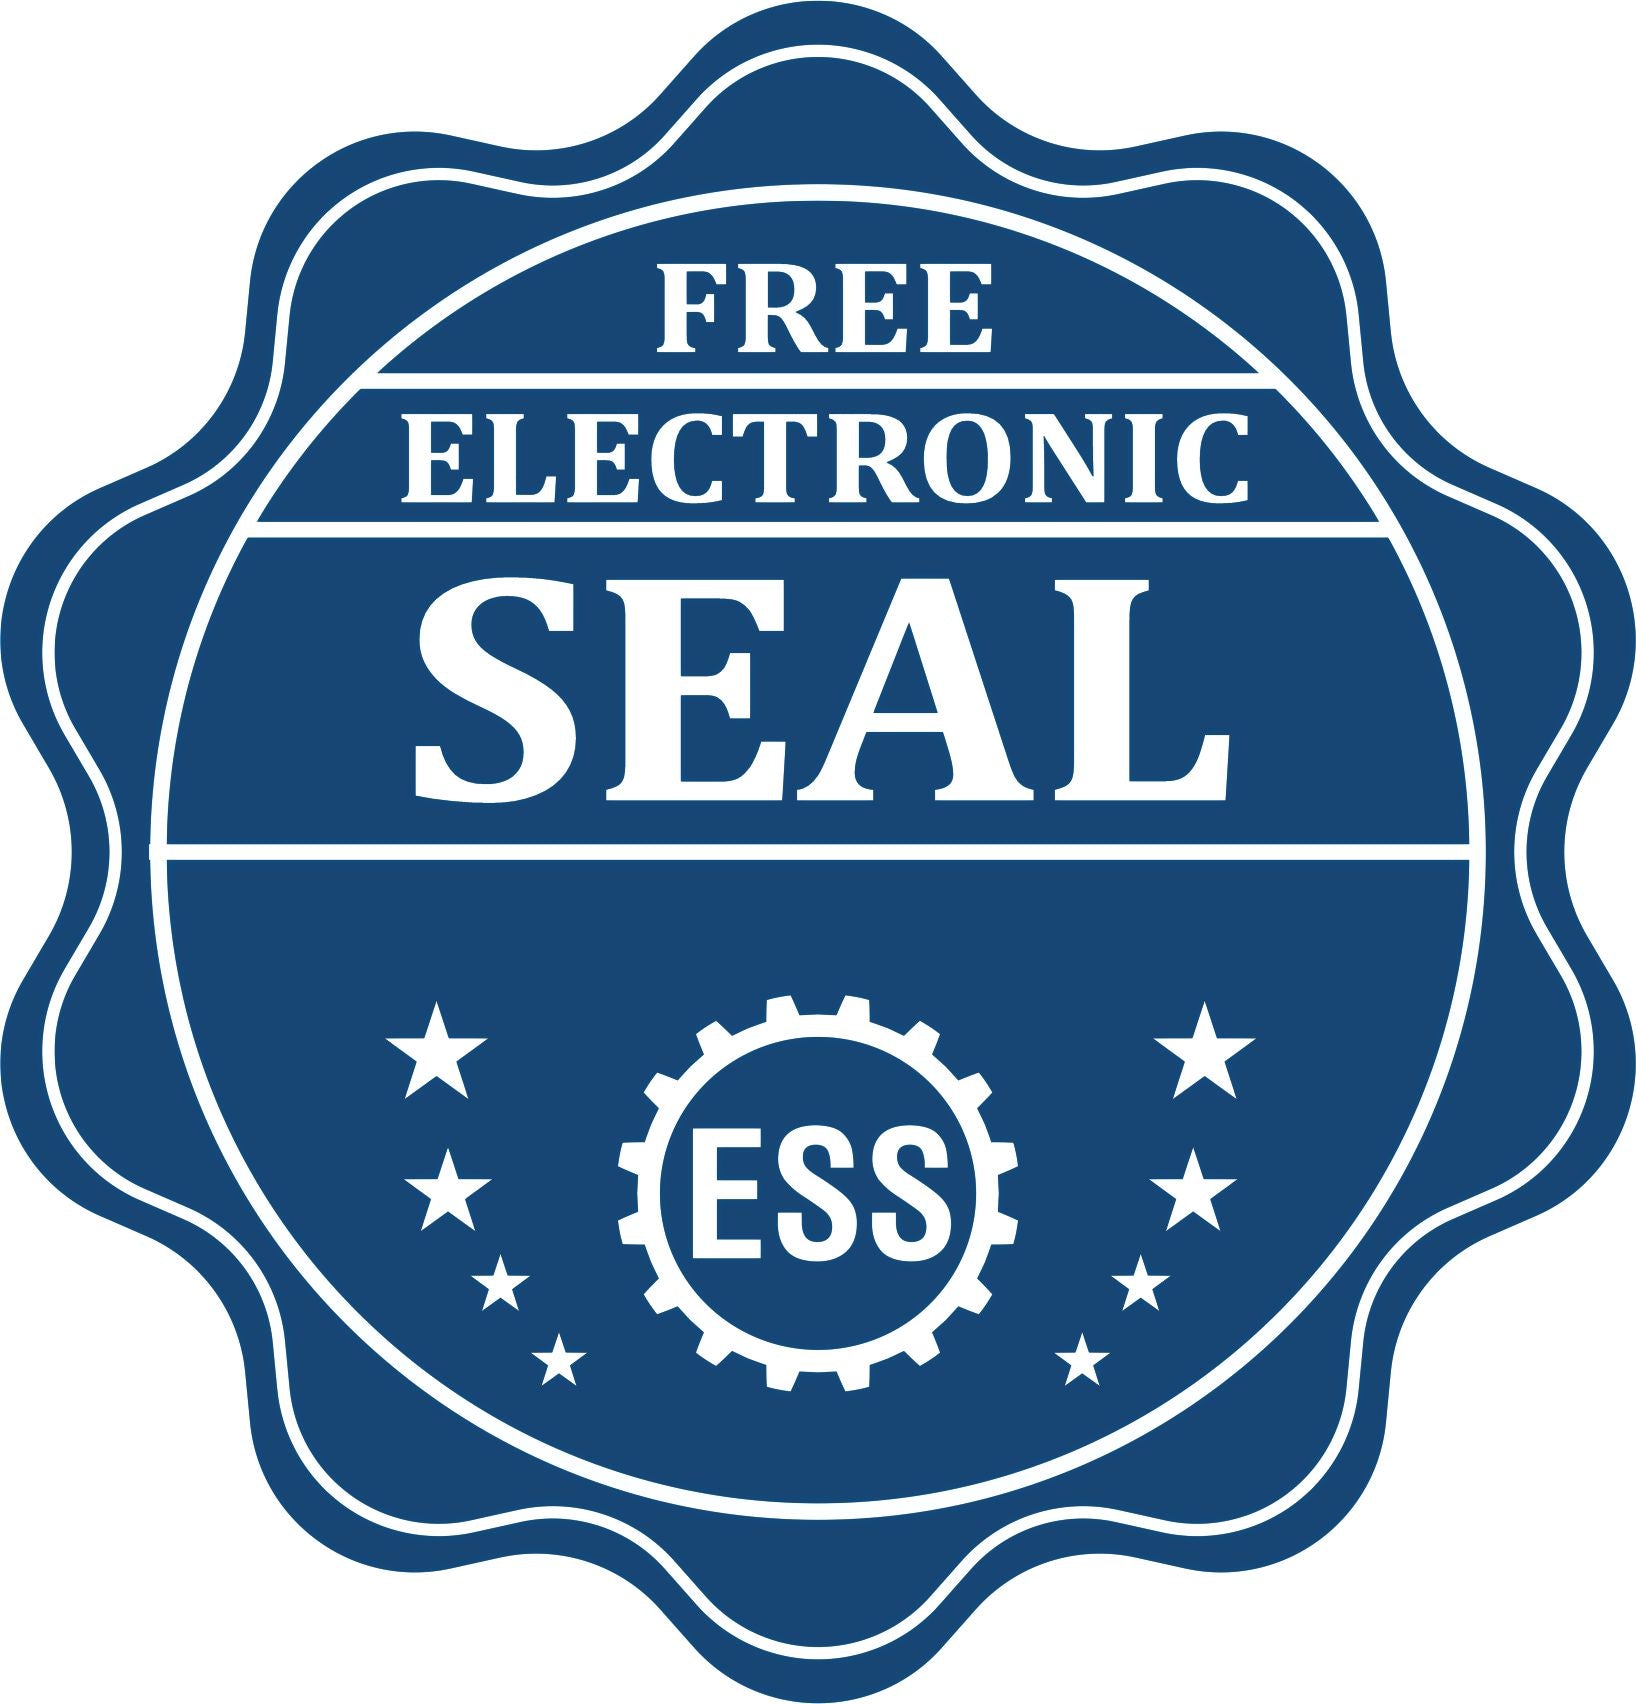 A badge showing a free electronic seal for the Gift South Dakota Landscape Architect Seal with stars and the ESS gear on the emblem.